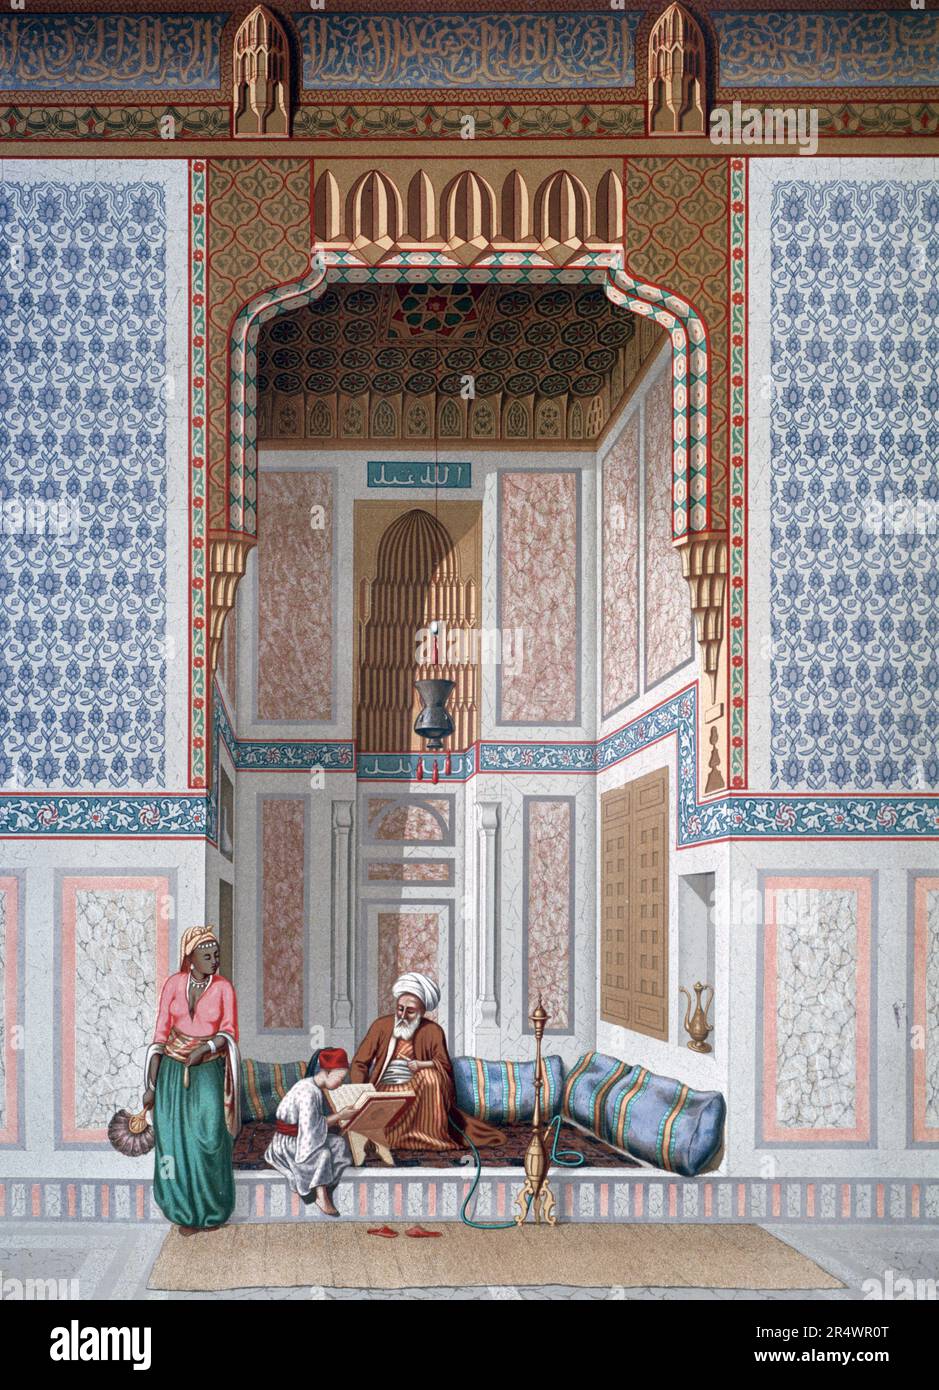 Interior of the Mosque of Khosne Ahmed el-Bordeyny. Chromolithograph after  Emile Prisse d'Avennes, (1807-1879) French architect, engineer and orientalist. Young boy reading the Koran to a teacher smoking a hookah.   Religion Islam Stock Photo